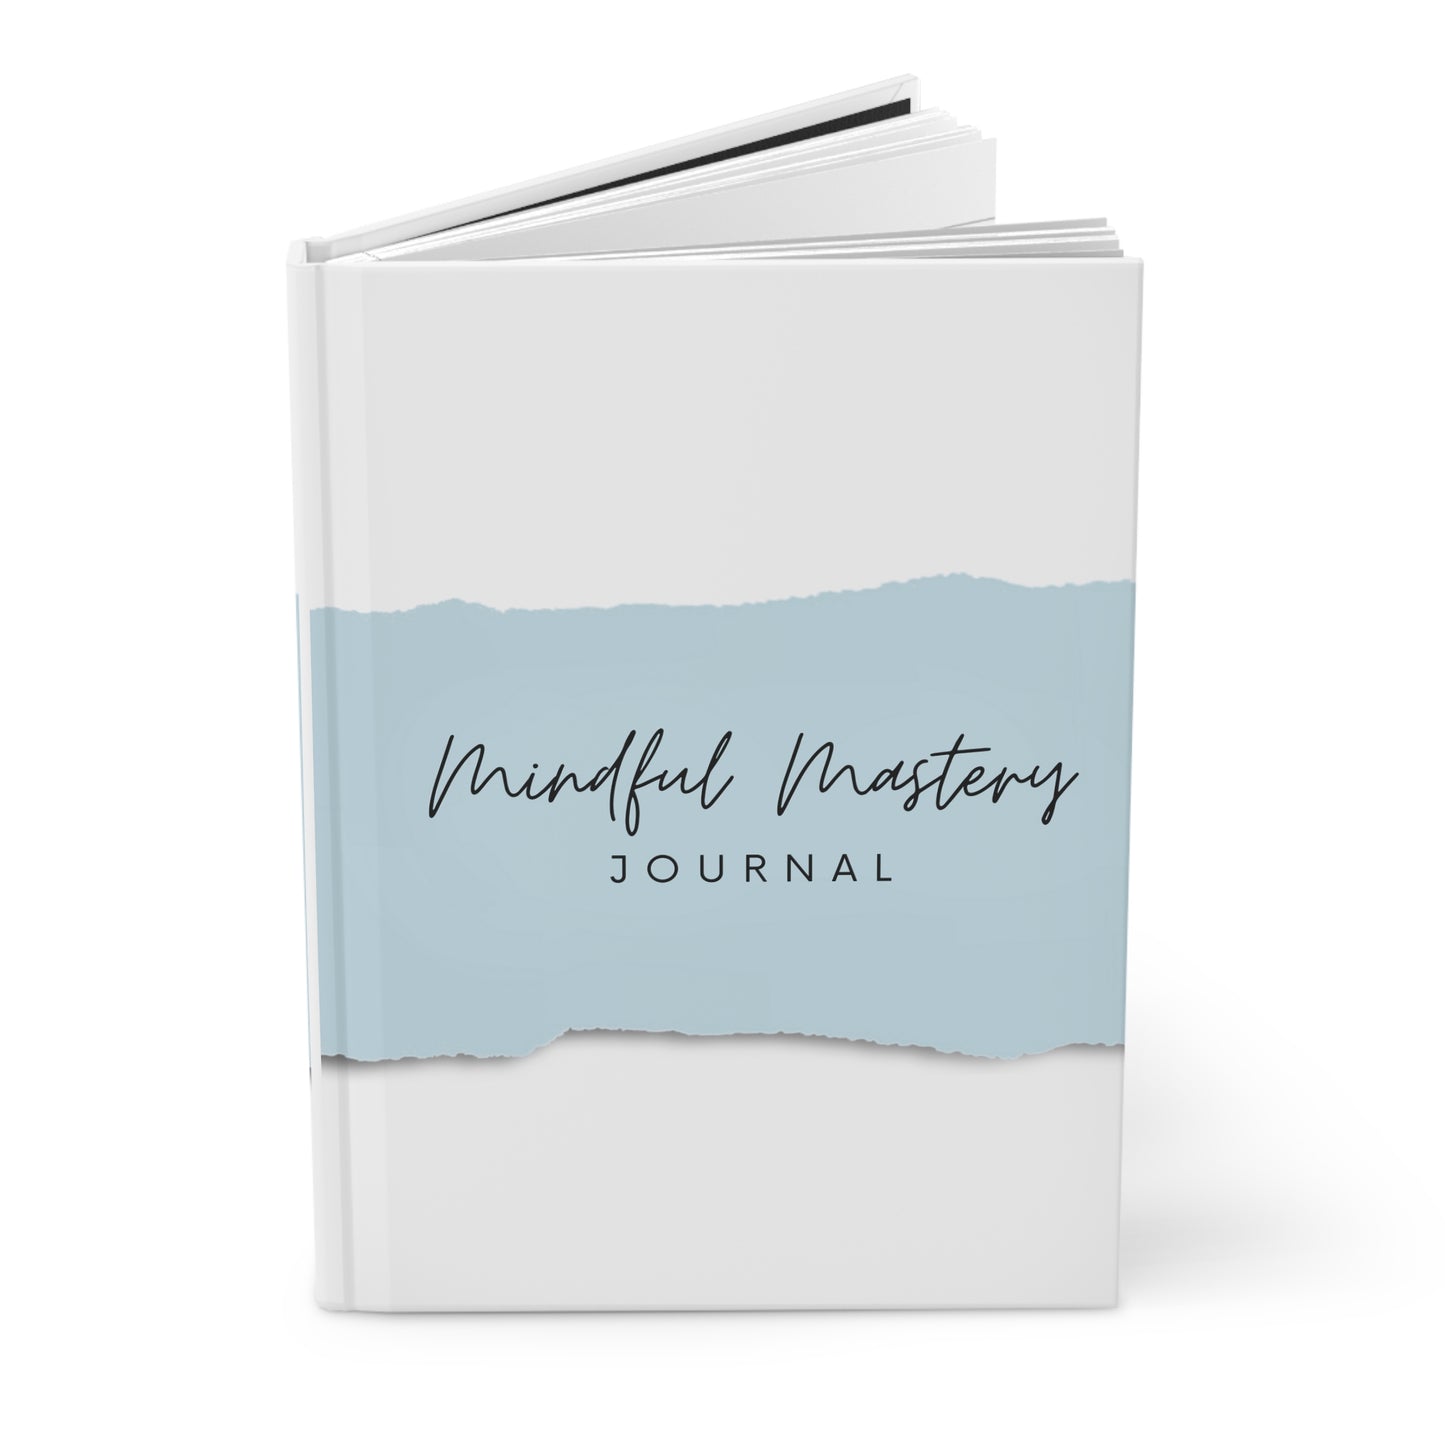 Mindful Mastery Journal - Arctic